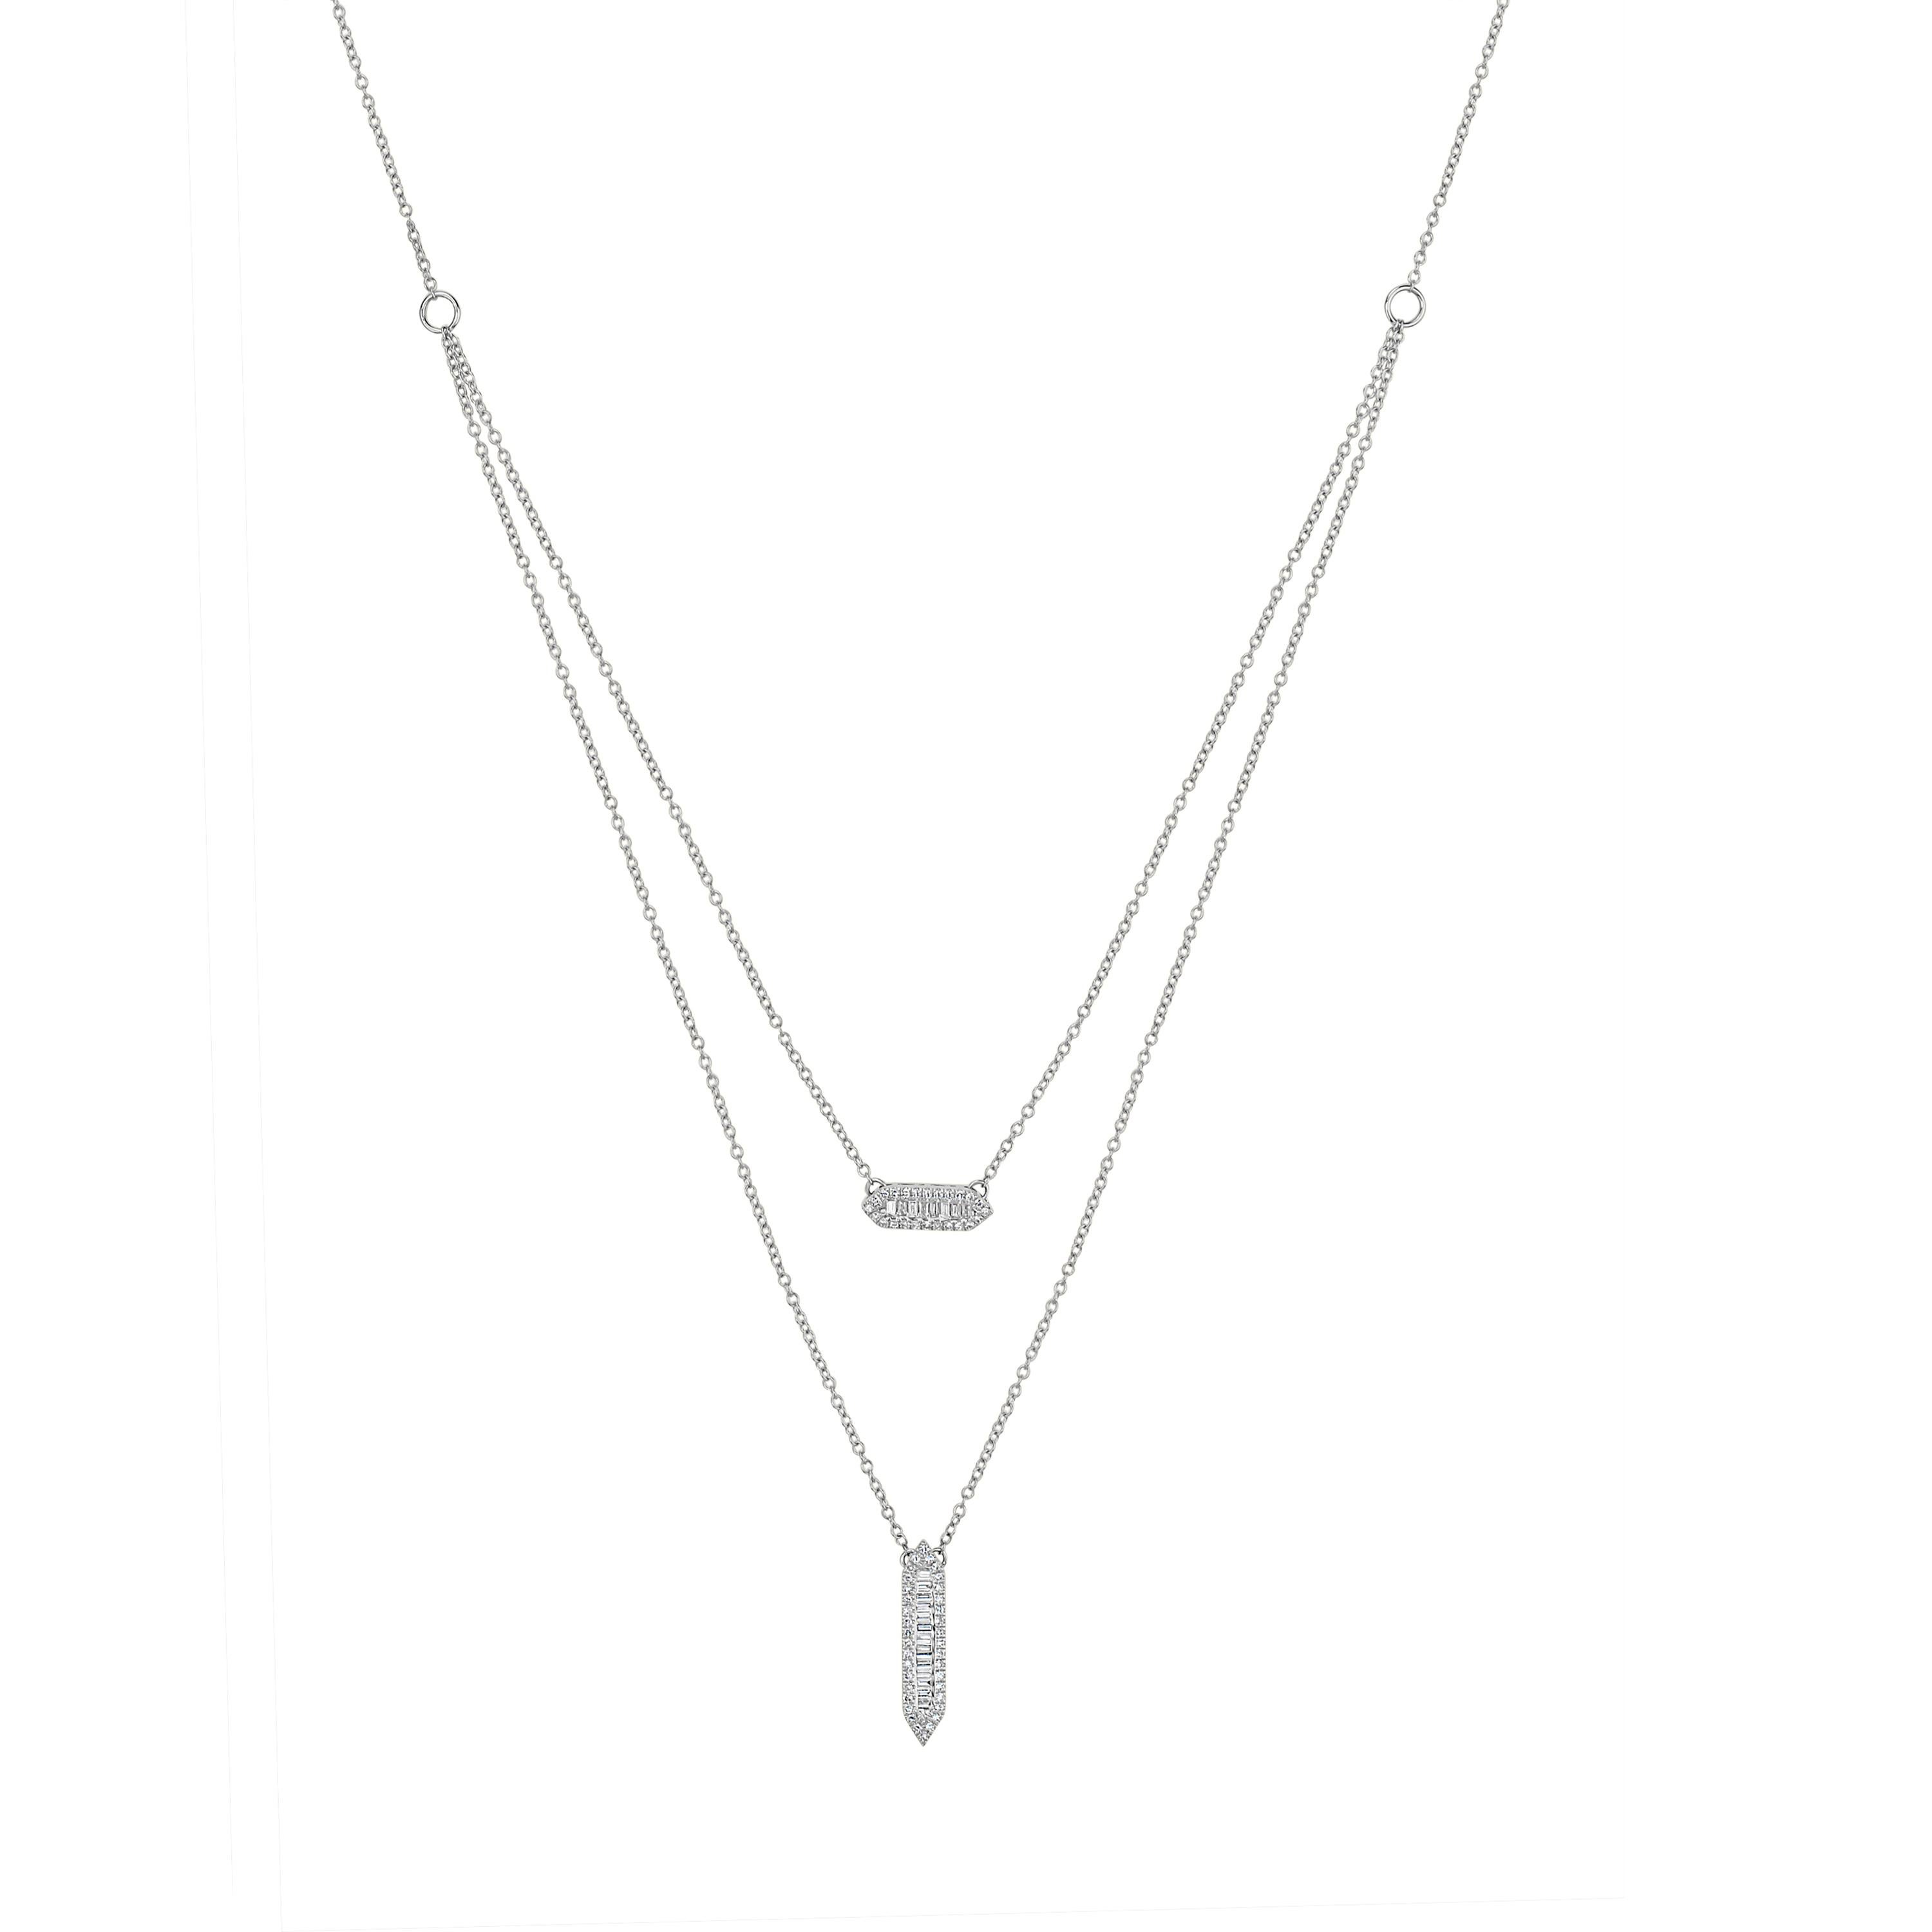 Crafted in 18K white gold this Luxle necklace is featured geometrically shaped bars. It consists of 21 baguette diamonds and 60 round diamonds on pave. It comes with a spring-ring clasp.

Please follow the Luxury Jewels storefront to view the latest